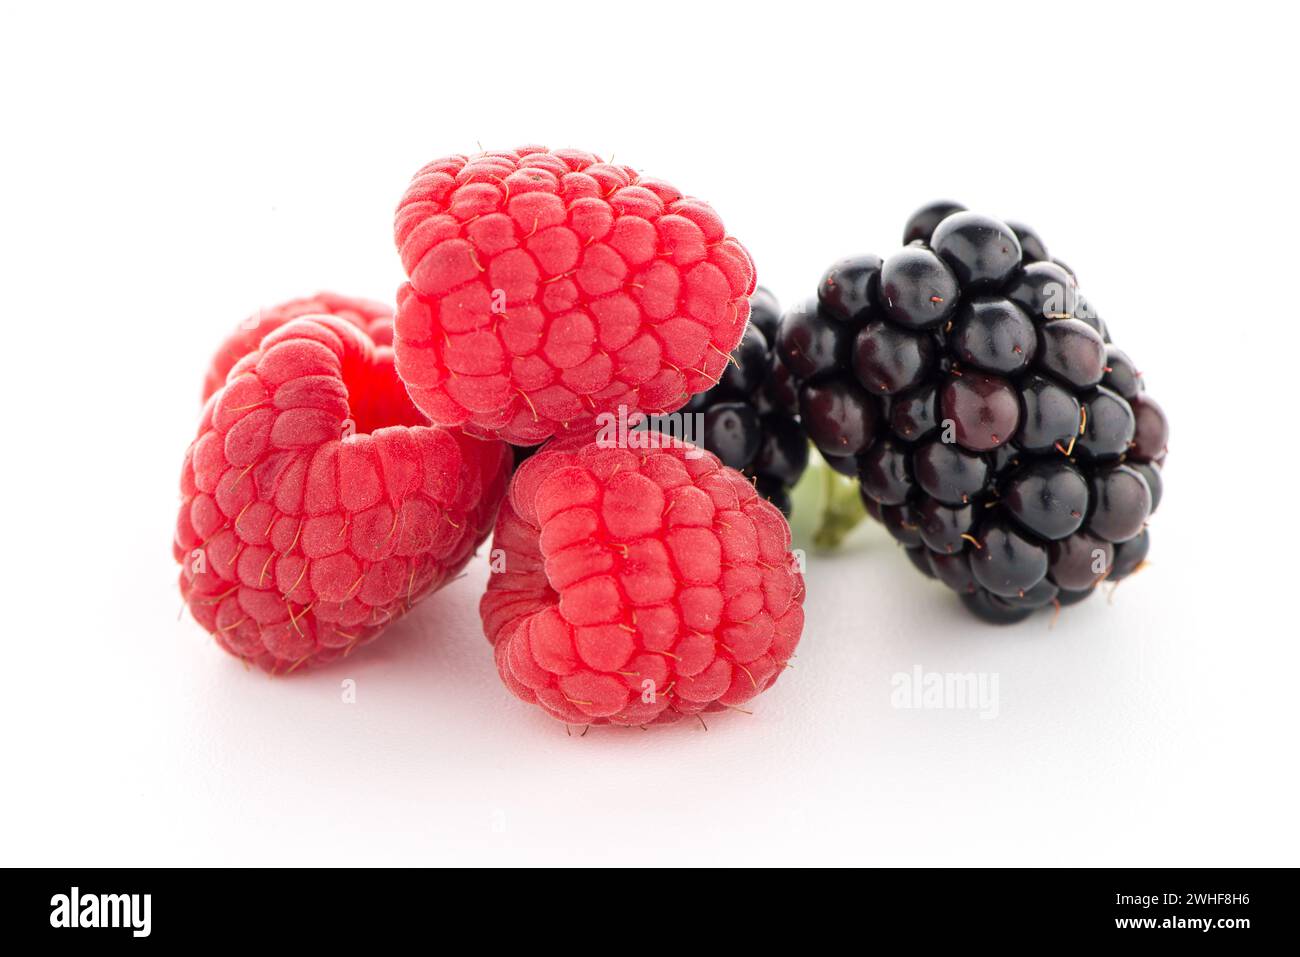 Raspberries and blackberry with mint leaf Stock Photo